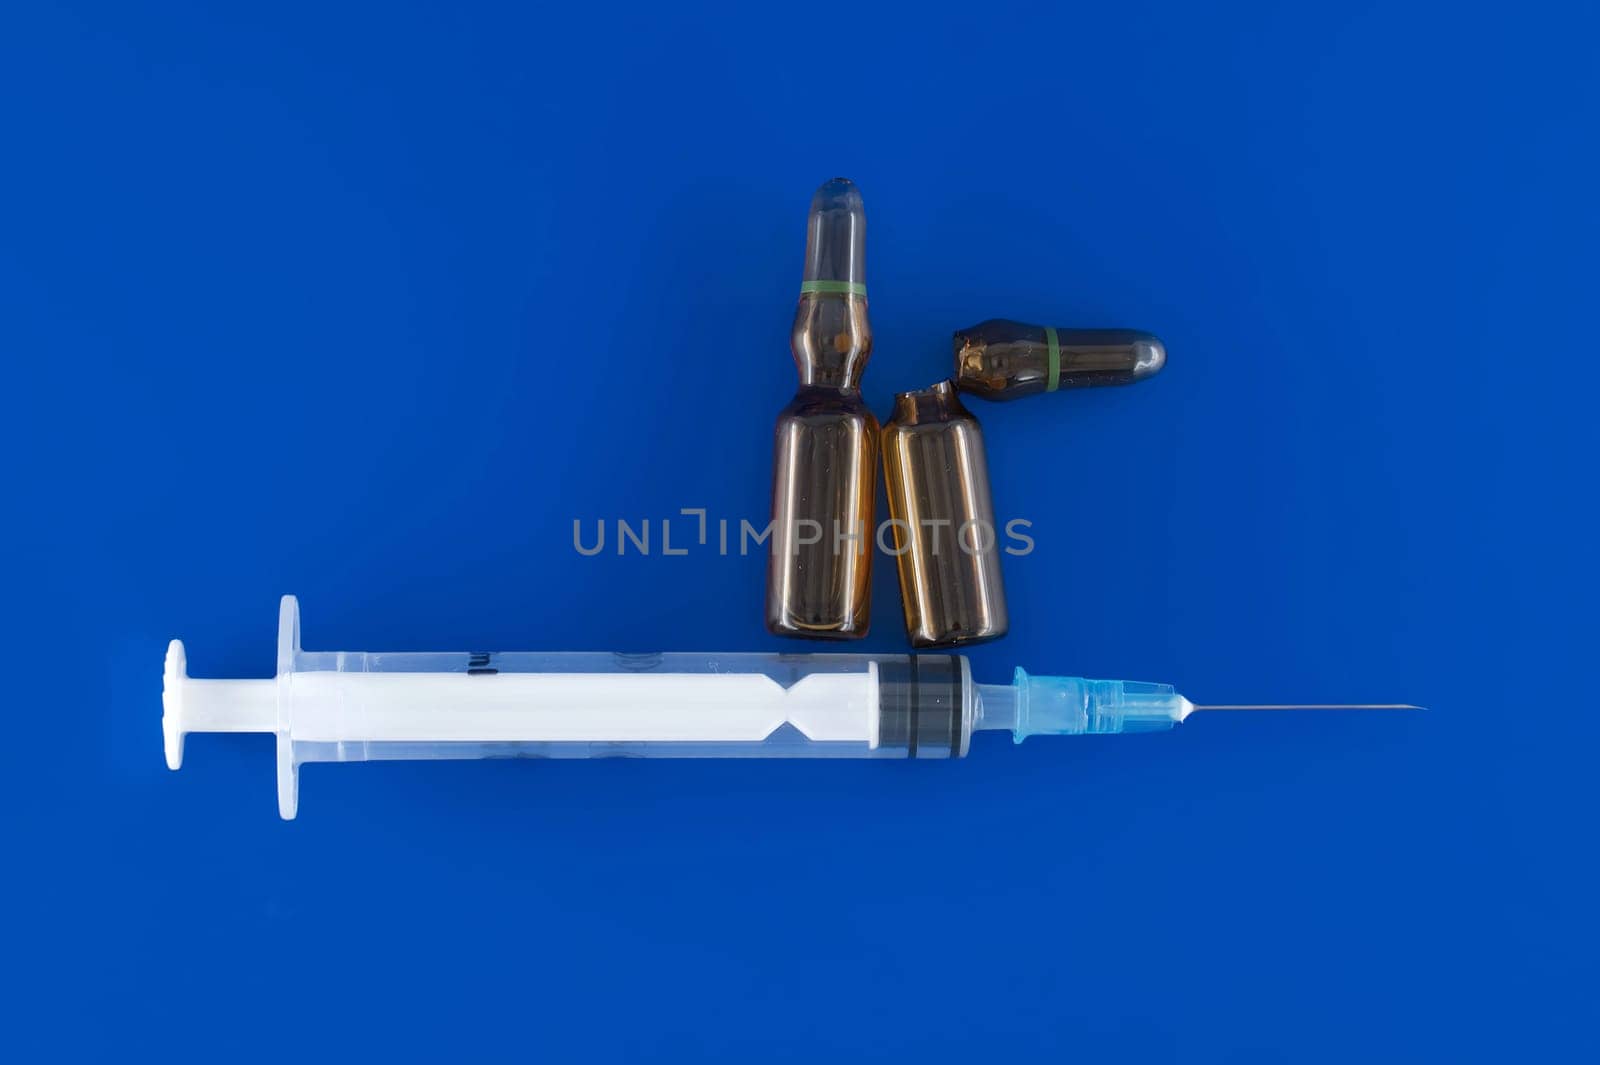 Needle, syringe and two brown vaccine ampules appearing ready for use against a blue background, medical treatment and vaccination